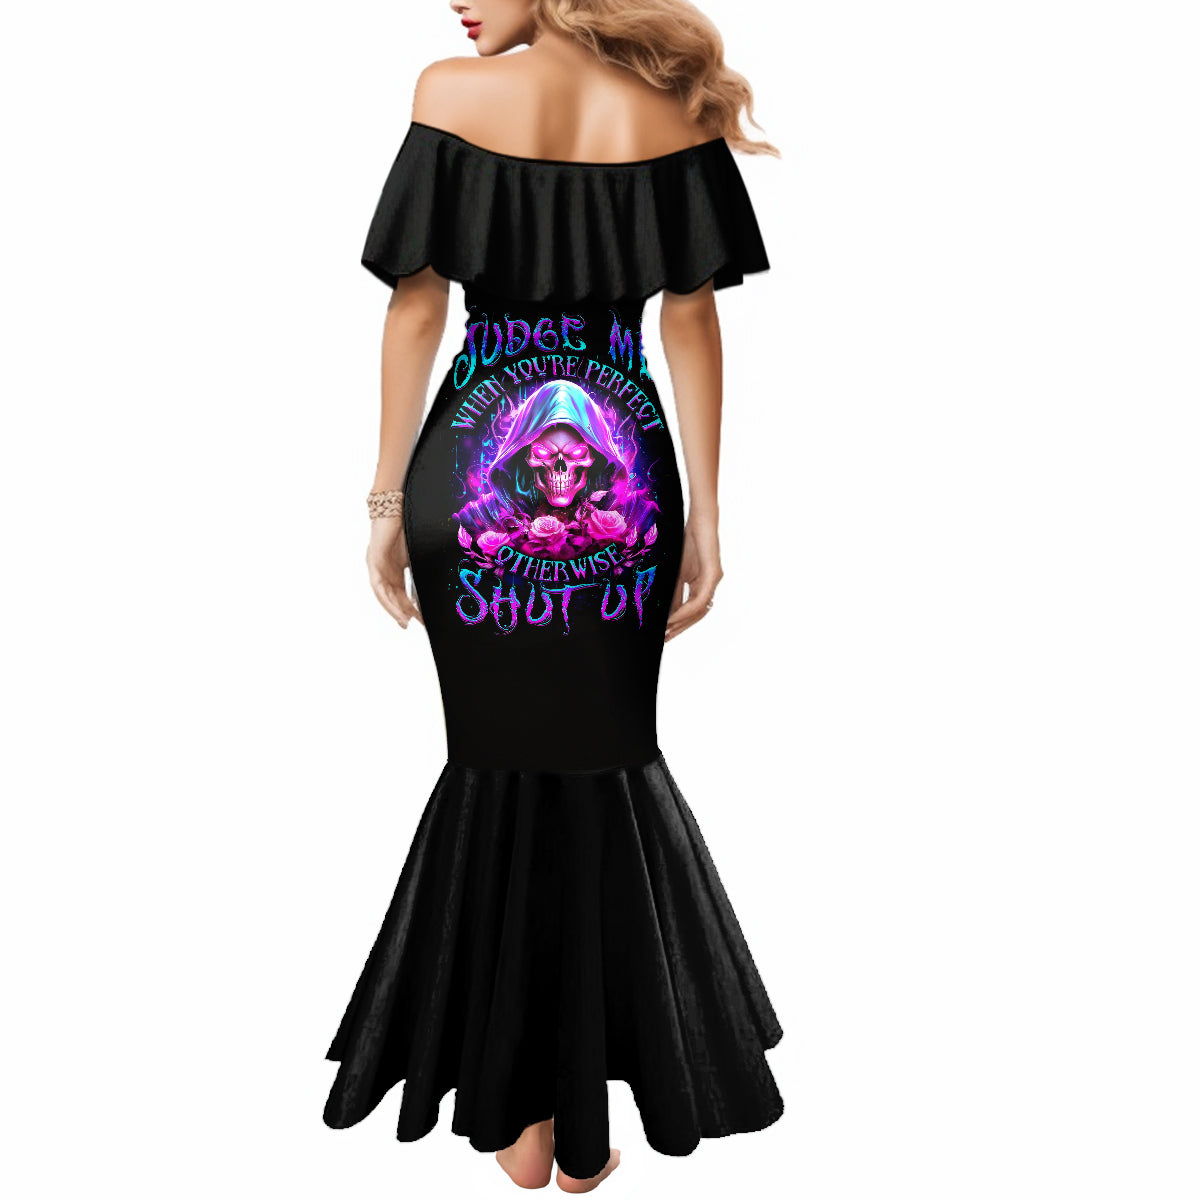 fire-skull-mermaid-dress-judge-me-when-youre-perfect-otherwise-shut-up